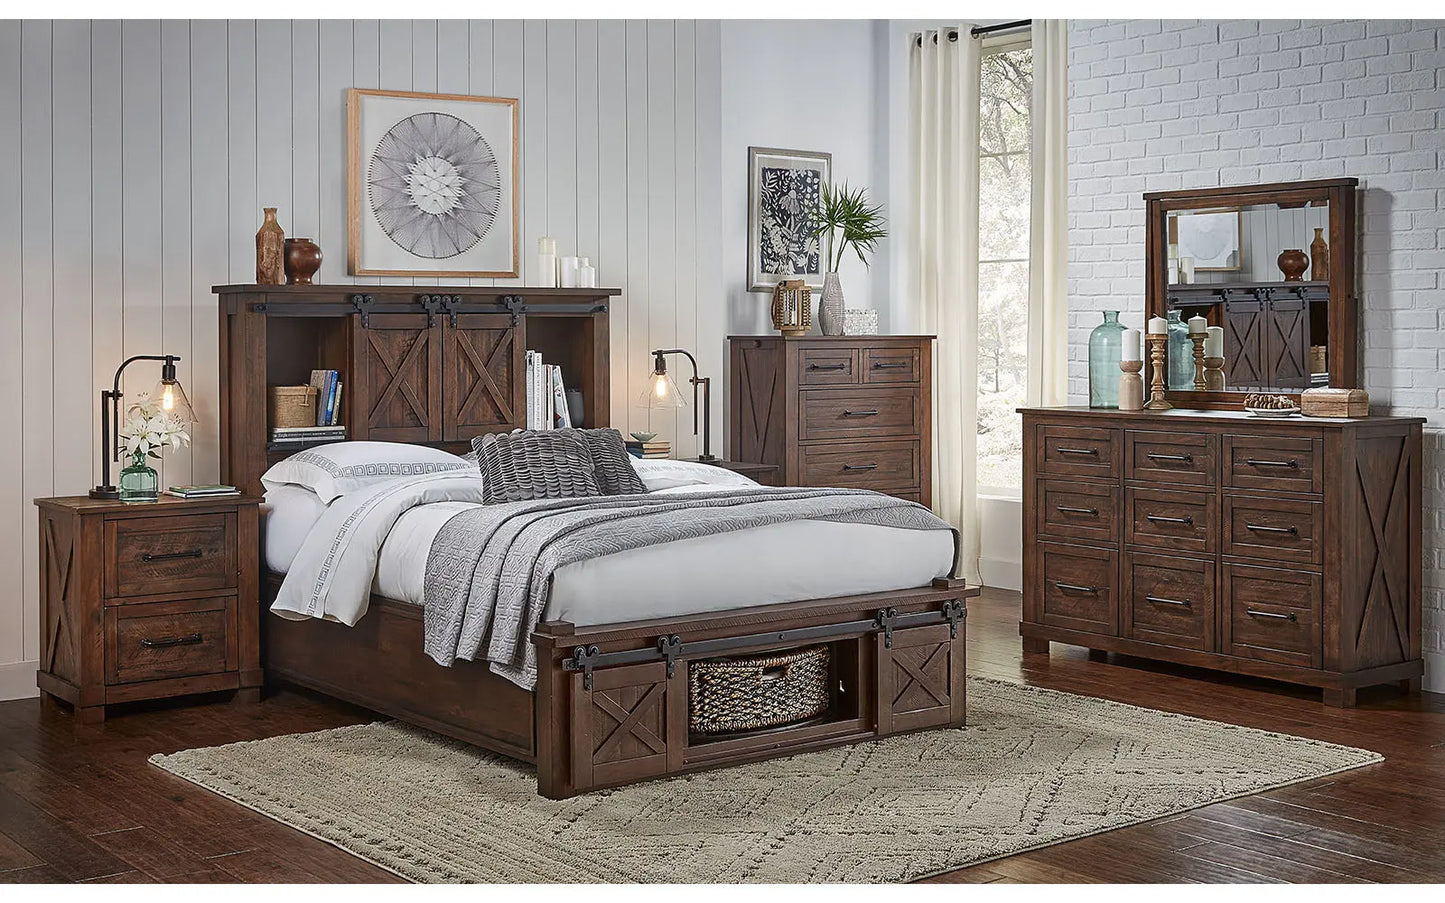 Sun Valley Rustic Timber King Storage Hdbr W/ Rotating Storage A-America